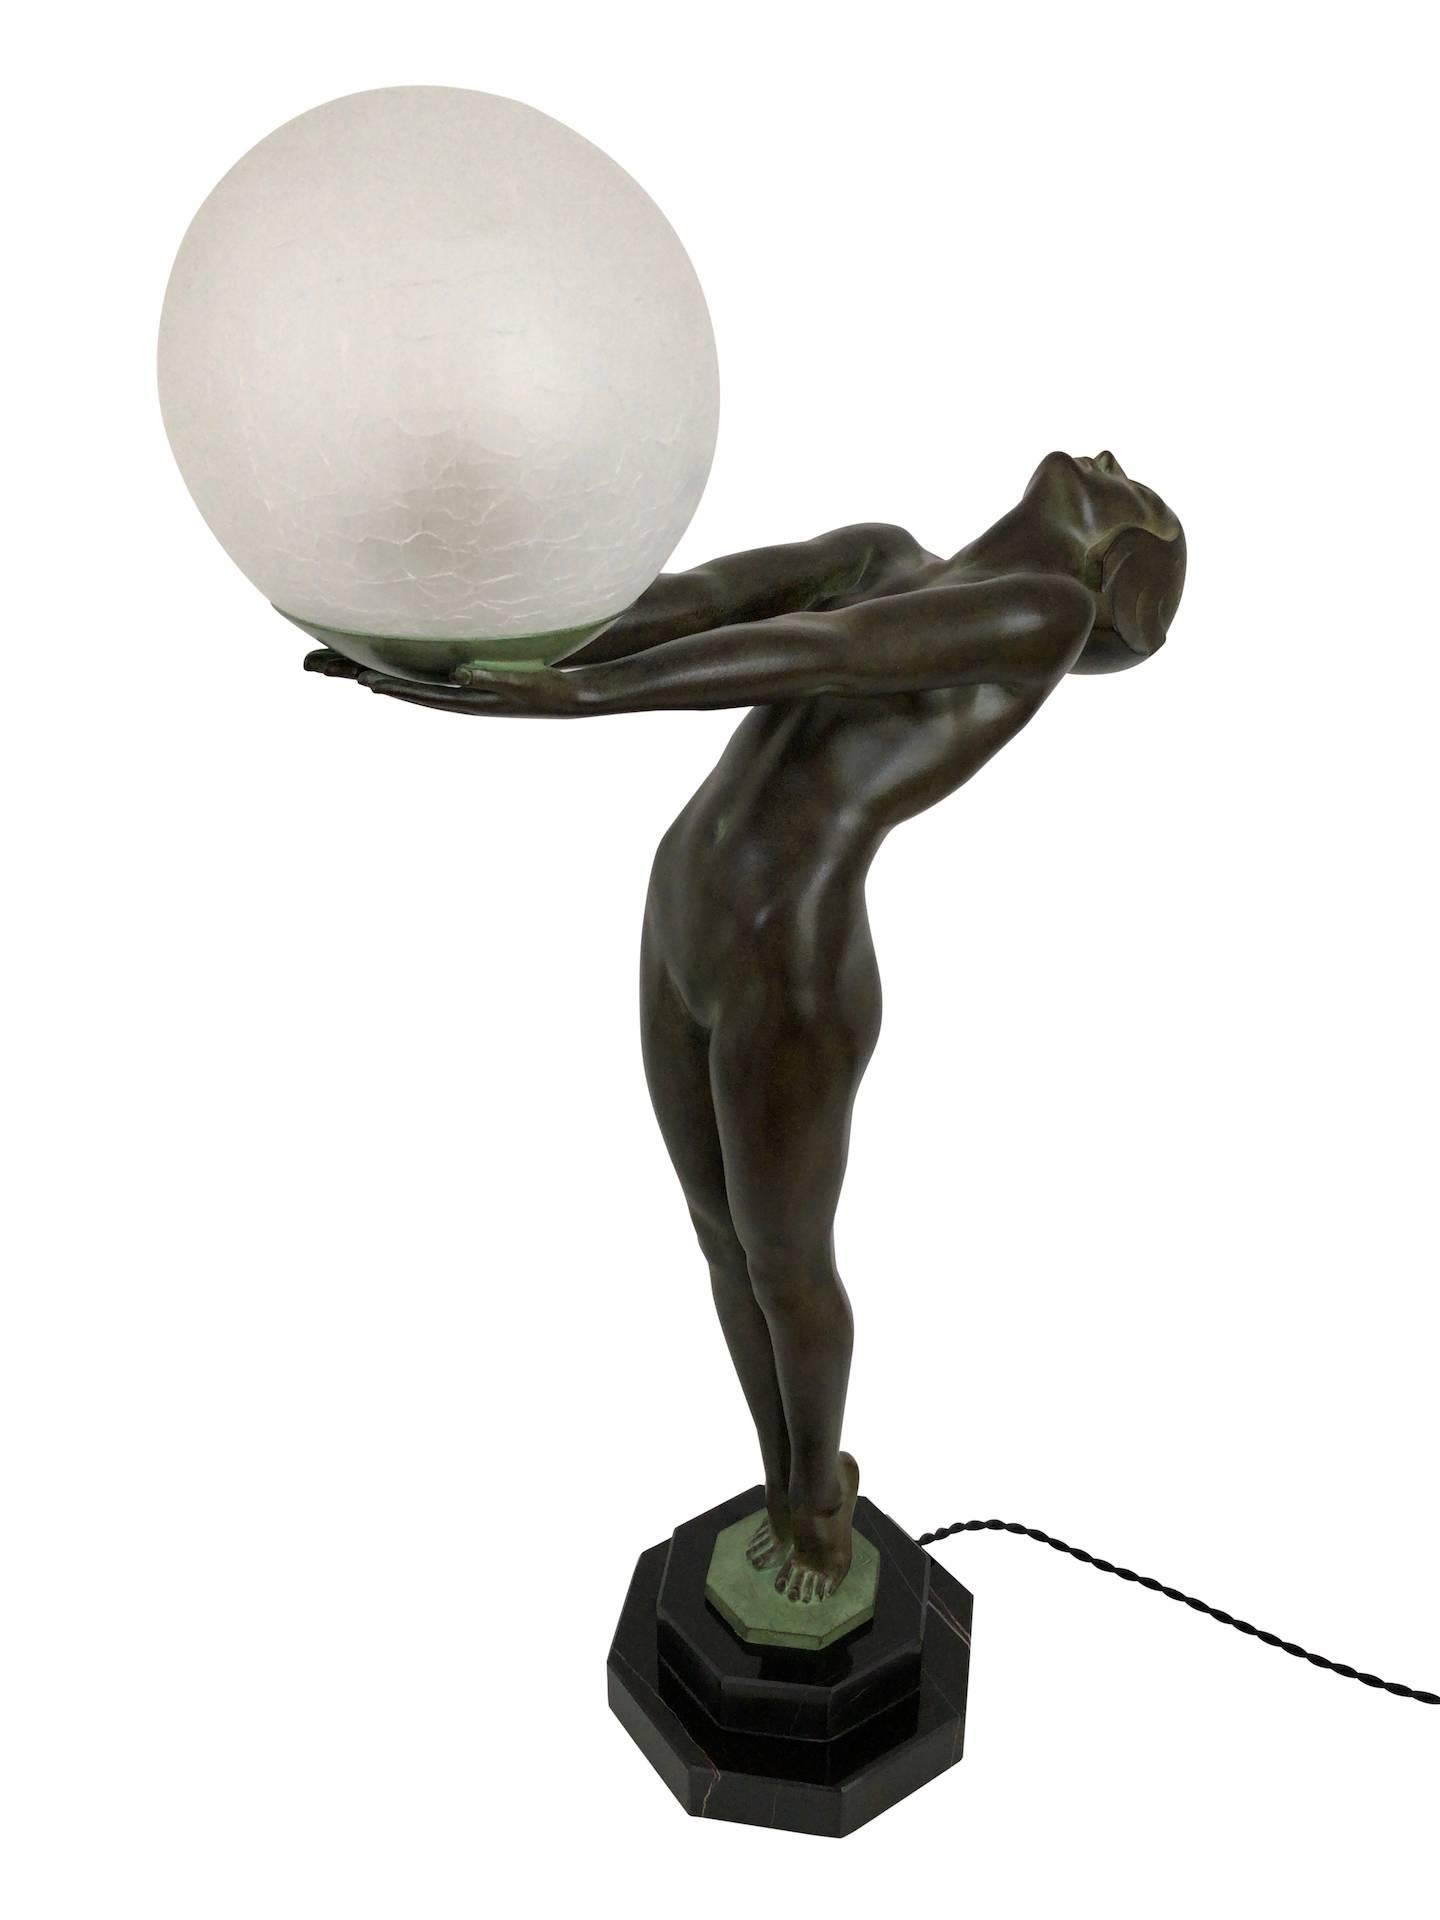 Lumina
Famous, very decorative Art Deco object. 
Slightly smaller than the famous Clarté 
Designed in France during the roaring 1920s by “Max Le Verrier” (1891-1973) 
Original Max Le Verrier, signed 
Art Deco style, France

Lighted sculpture